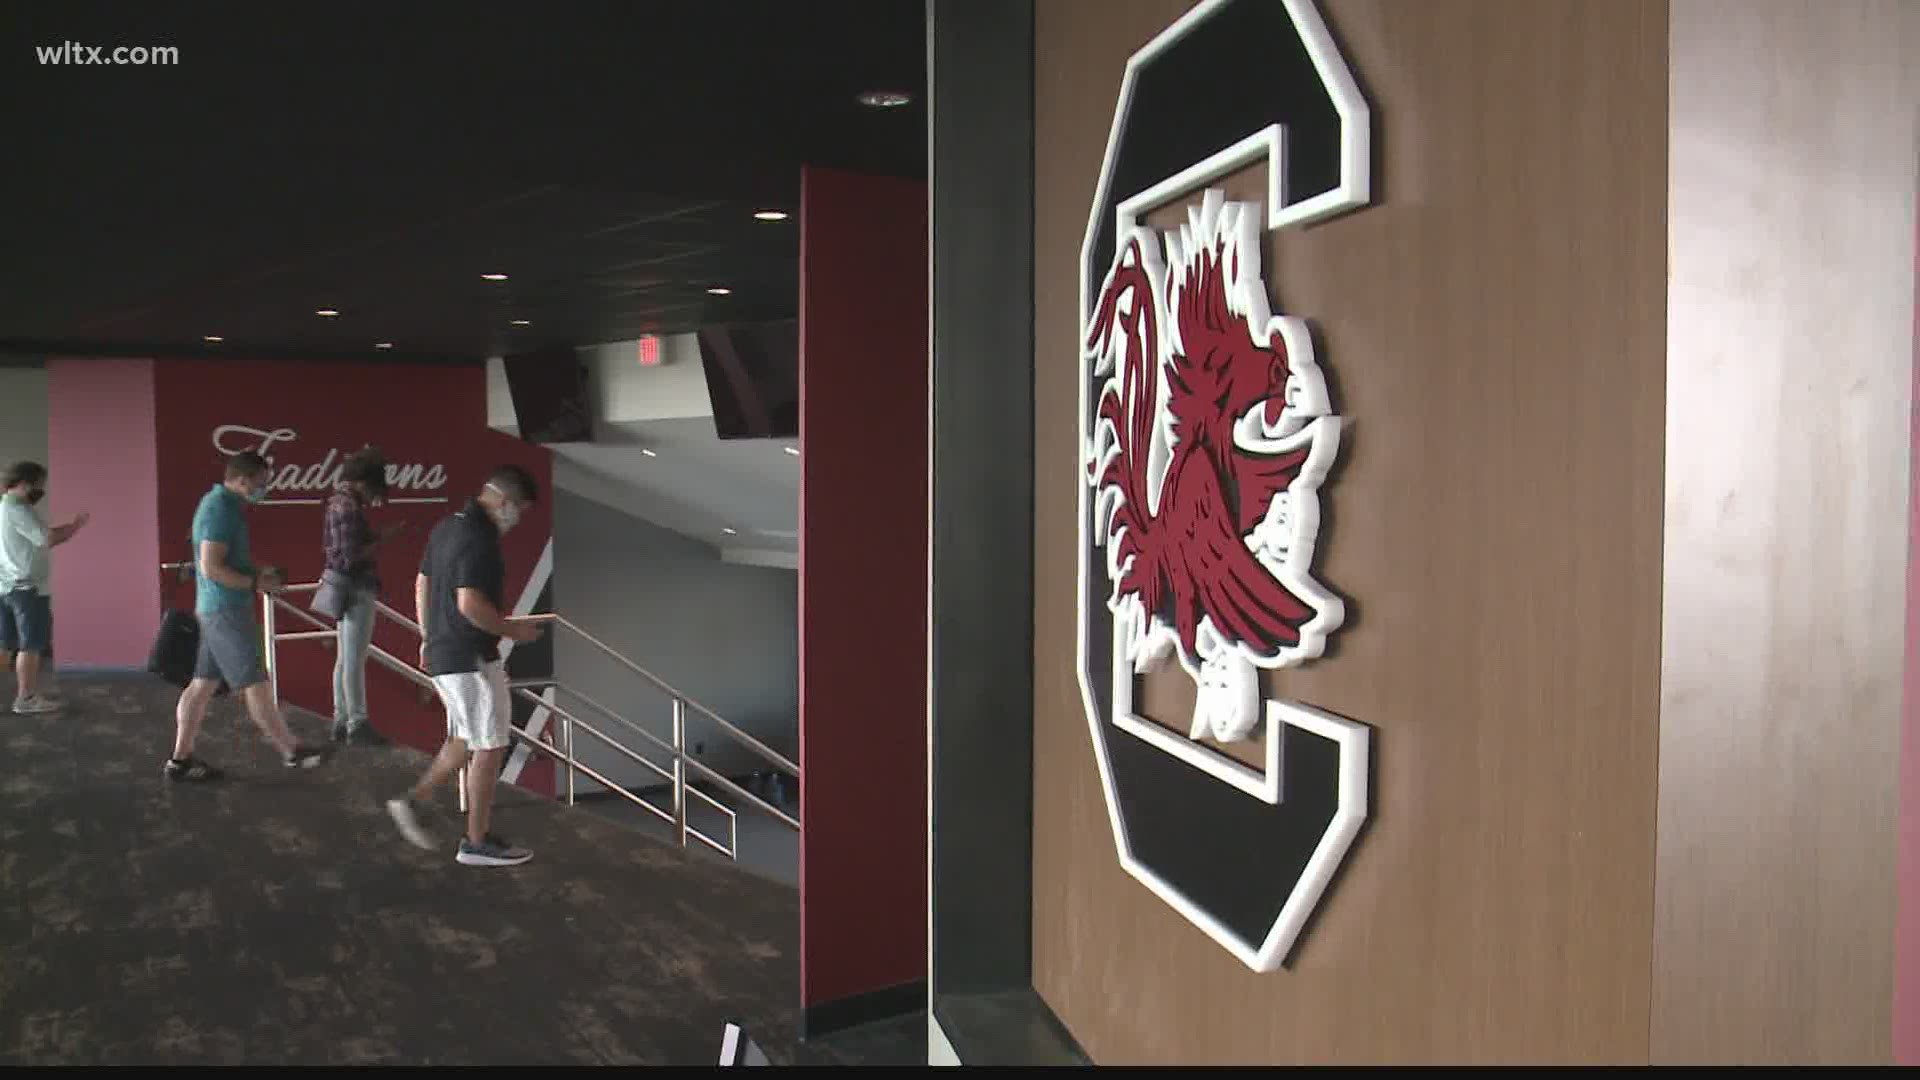 Gamecock athletics director Ray Tanner leads a media tour of Williams-Brice Stadium after its $22.5 million makeover.